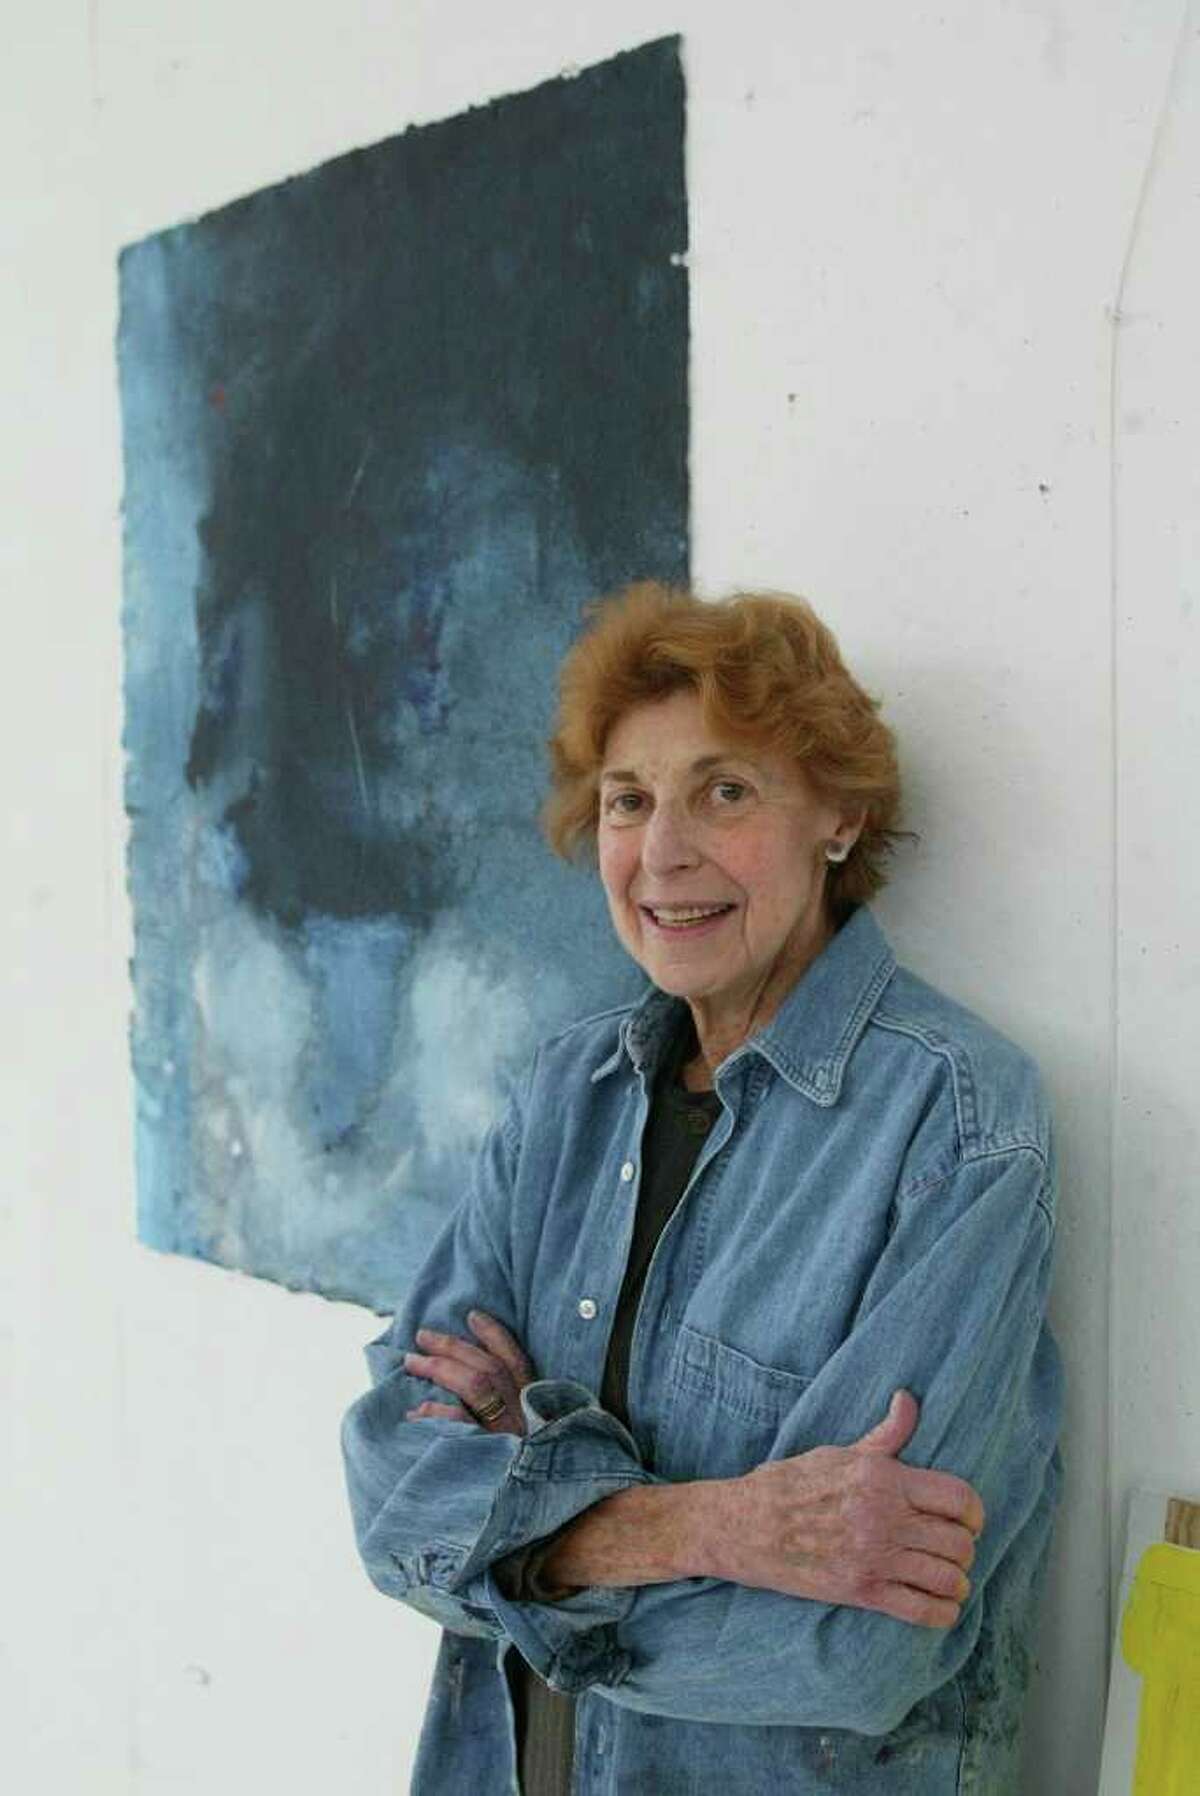 FILE -- The artist Helen Frankenthaler with her work, "Blue Lady," an acrylic on paper, in her studio on Contentment Island in Darien, Conn., April 8, 2003. Frankenthaler, the lyrically abstract painter whose technique of staining pigment into raw canvas helped shape an influential art movement in the mid-20th century, died on Tuesday, Dec. 27, 2011, at her home in Darien. She was 83. (Suzanne DeChillo/The New York Times)